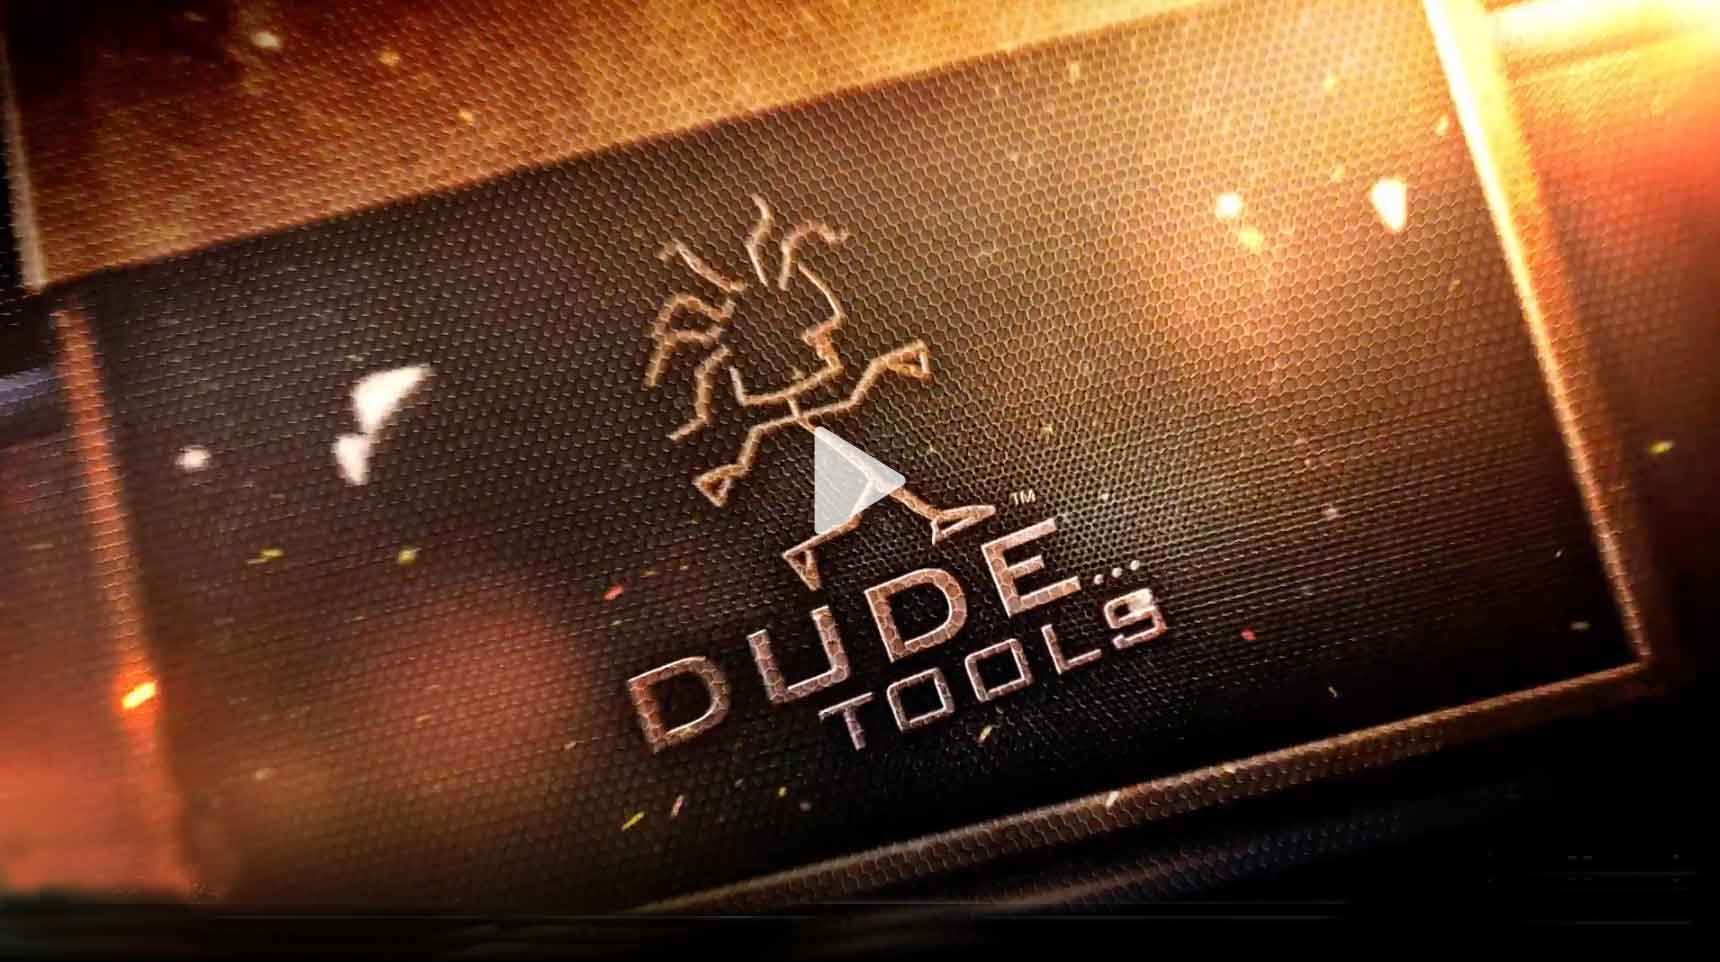 Dude Buster Video